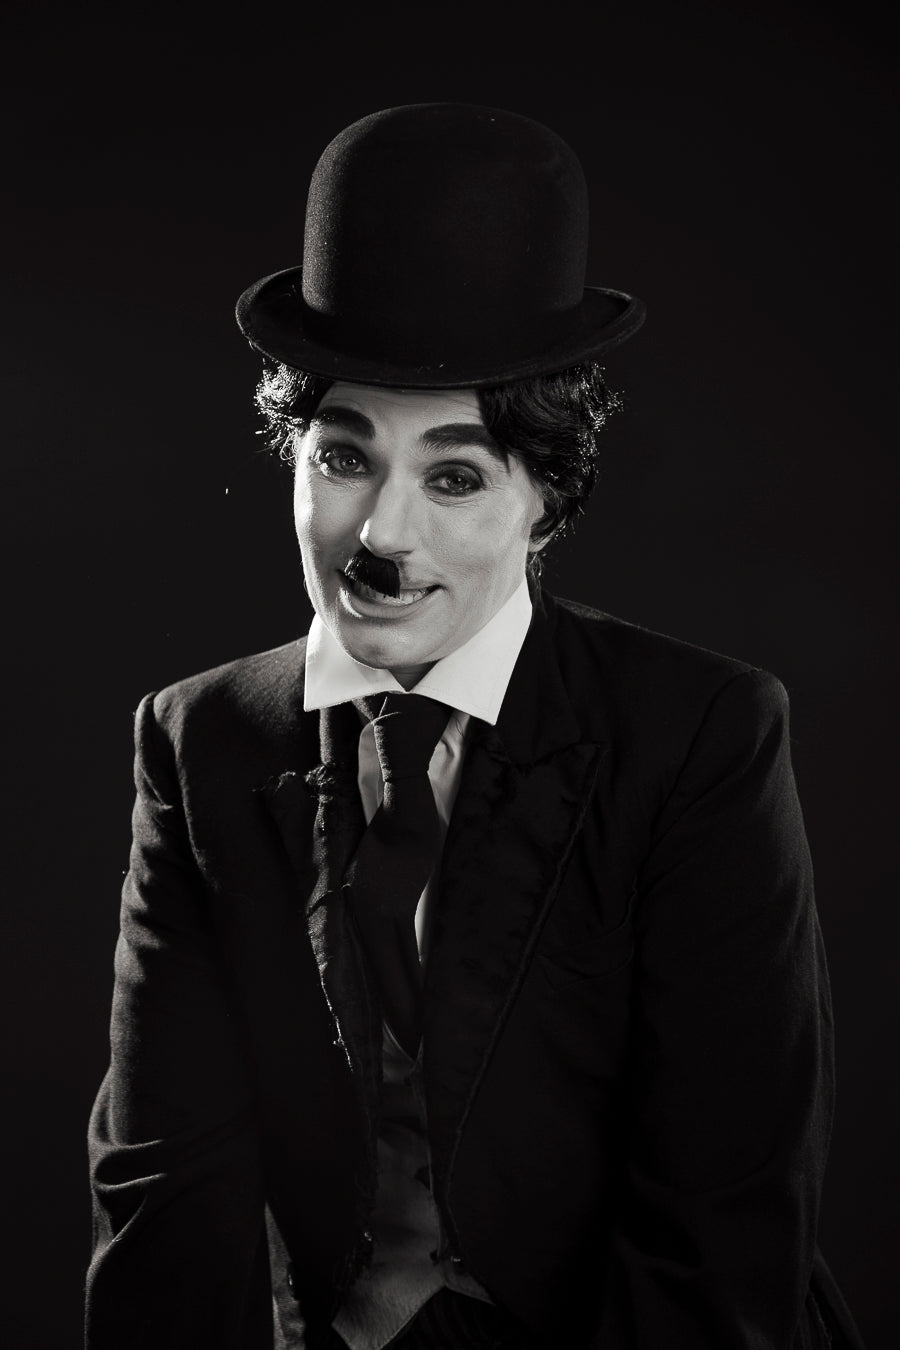 Charlie Chaplin Costume Hire or Cosplay, plus Makeup and Photography. Proudly by and available at, Little Shop of Horrors Costumery 6/1 Watt Rd Mornington & Melbourne